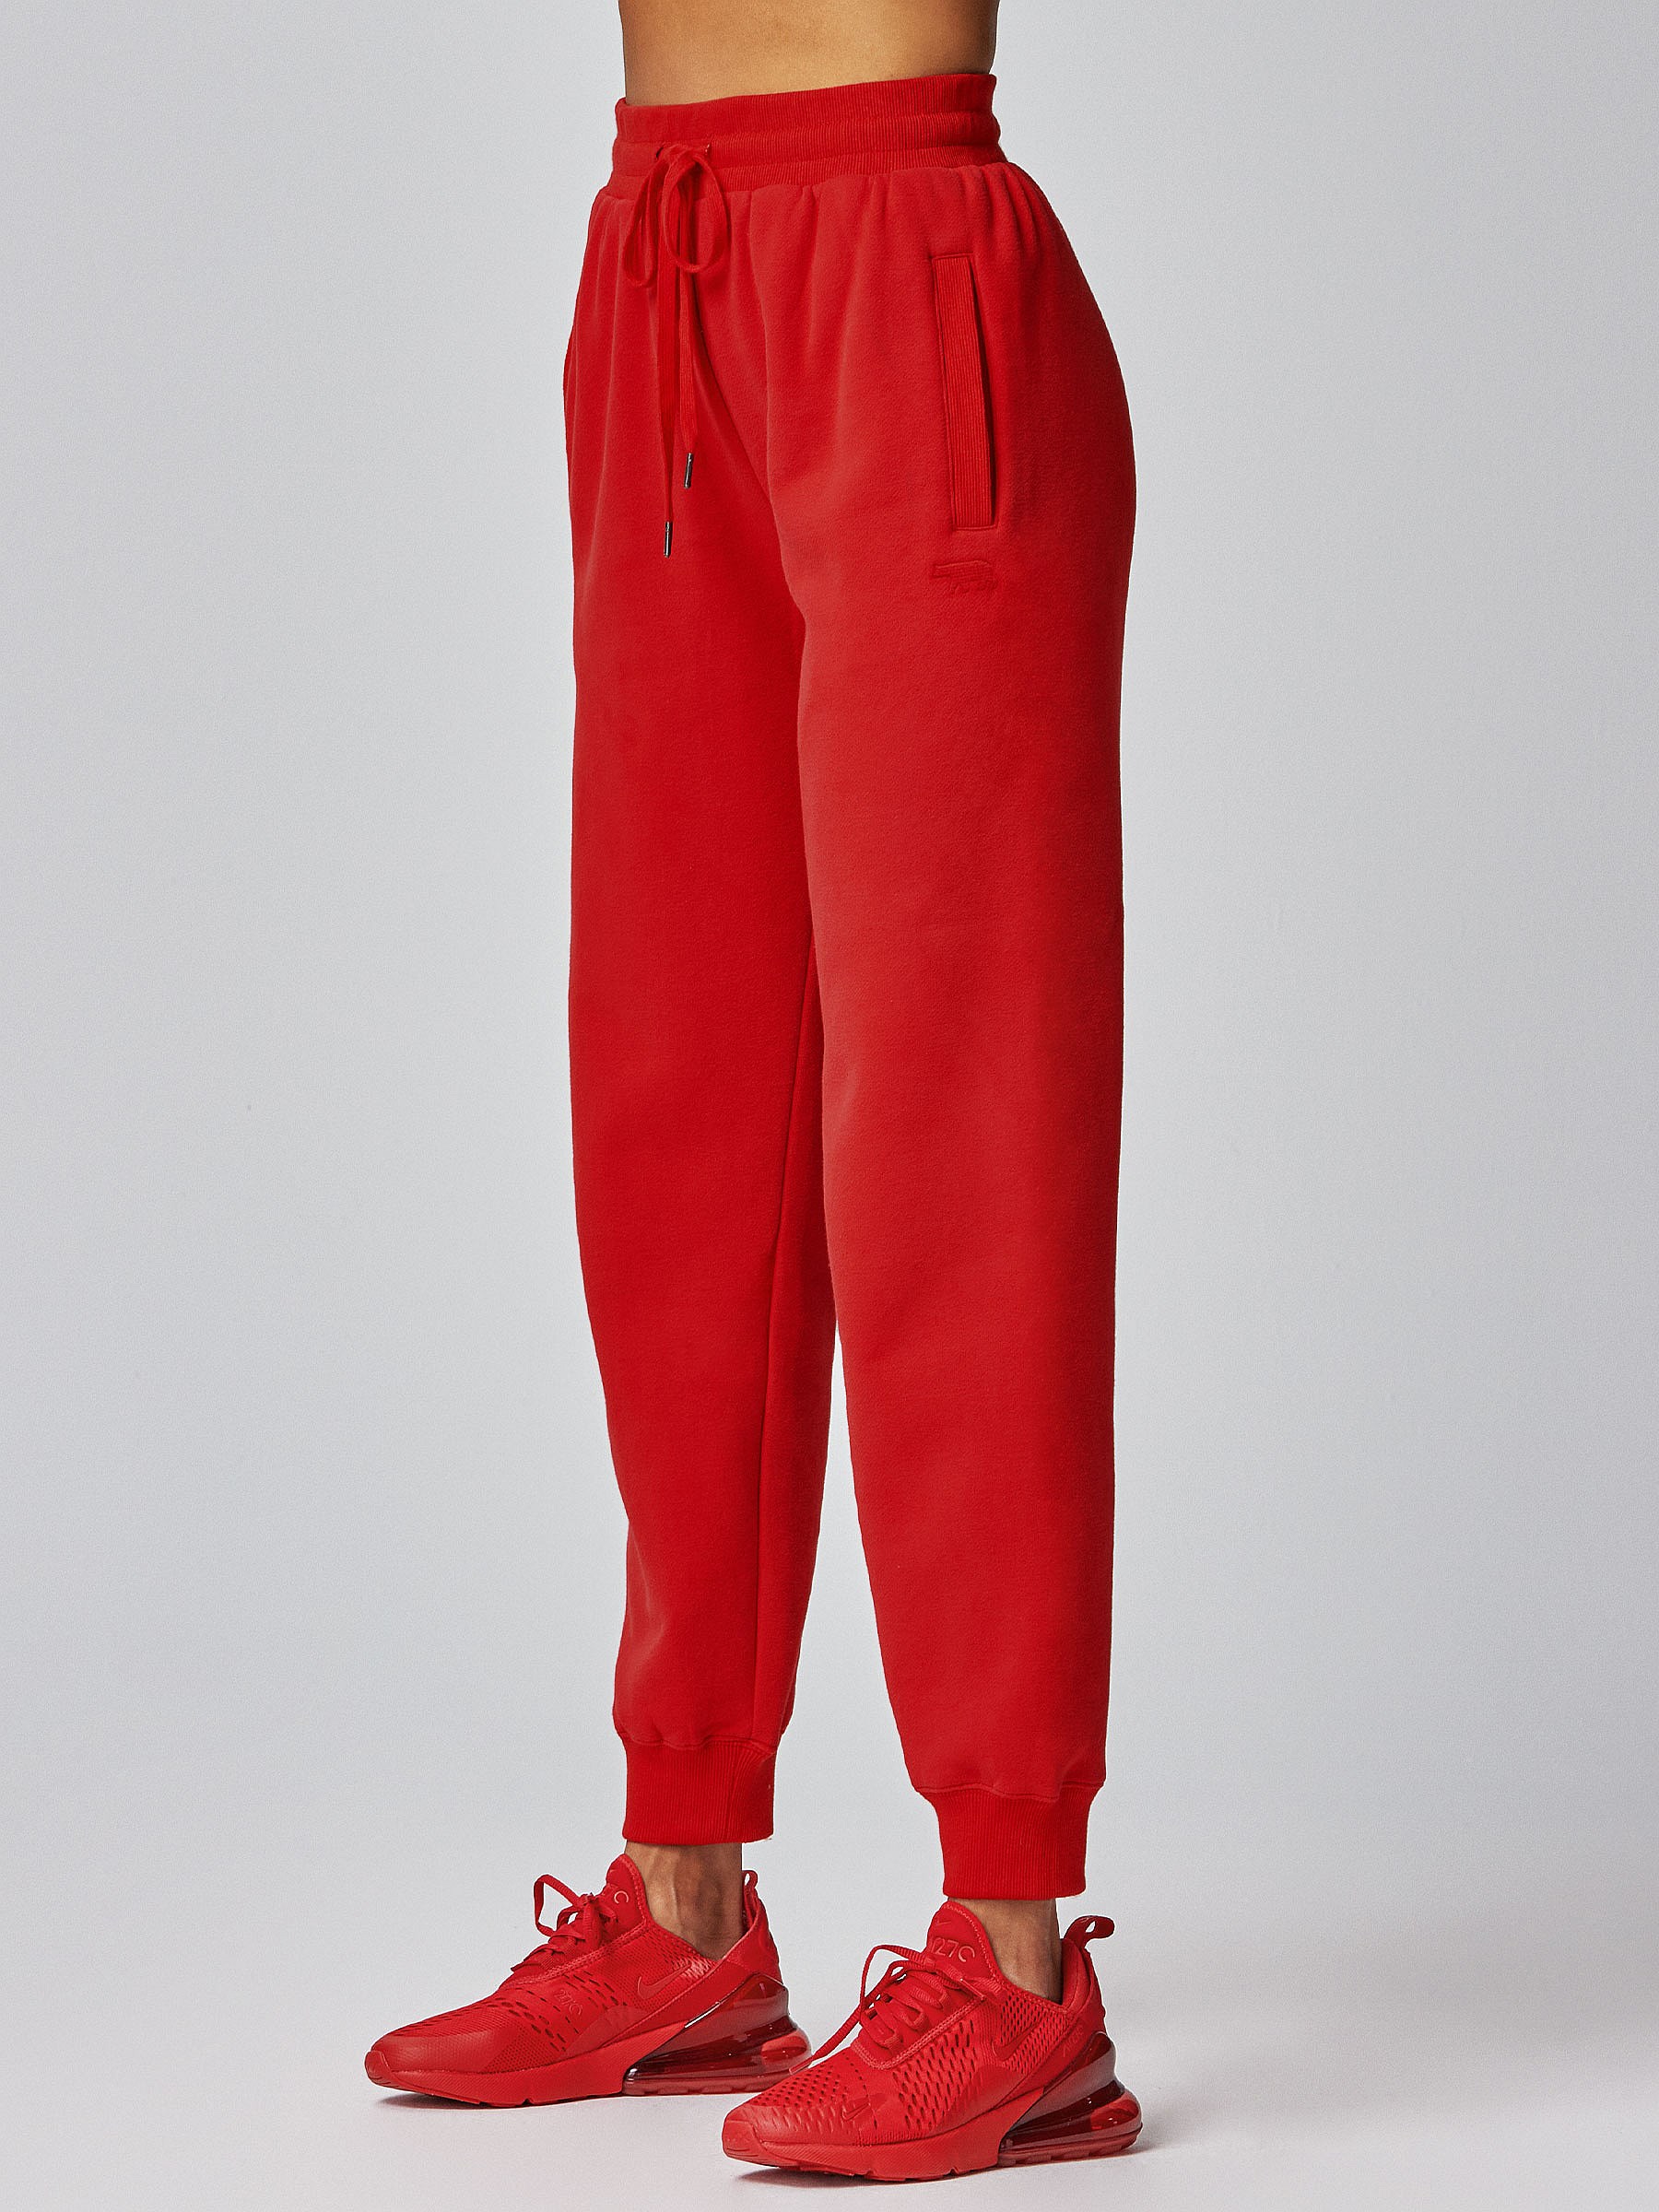 Running Bare Red Legacy Sweatpants. Shop Women's Trackpants